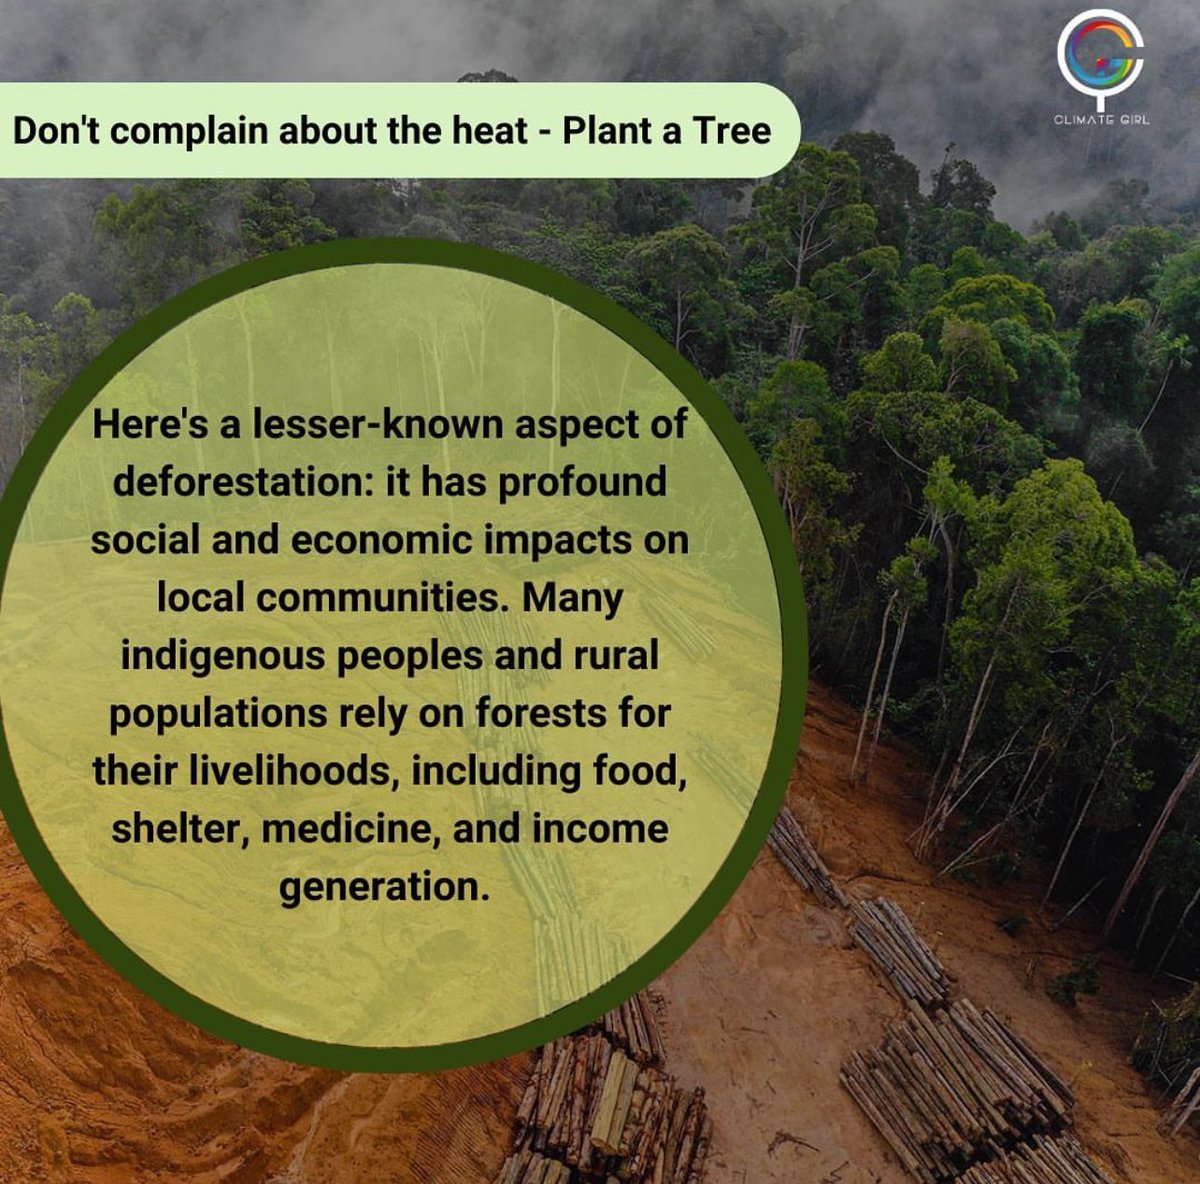 Deforestation harms communities! 🌳👨‍🌾 Indigenous livelihoods at risk. Protecting forests is essential for people and culture. #ForestImpact #CommunityWellBeing #ravenspirit #peakpeekstore #tagethernet #climategirlnft